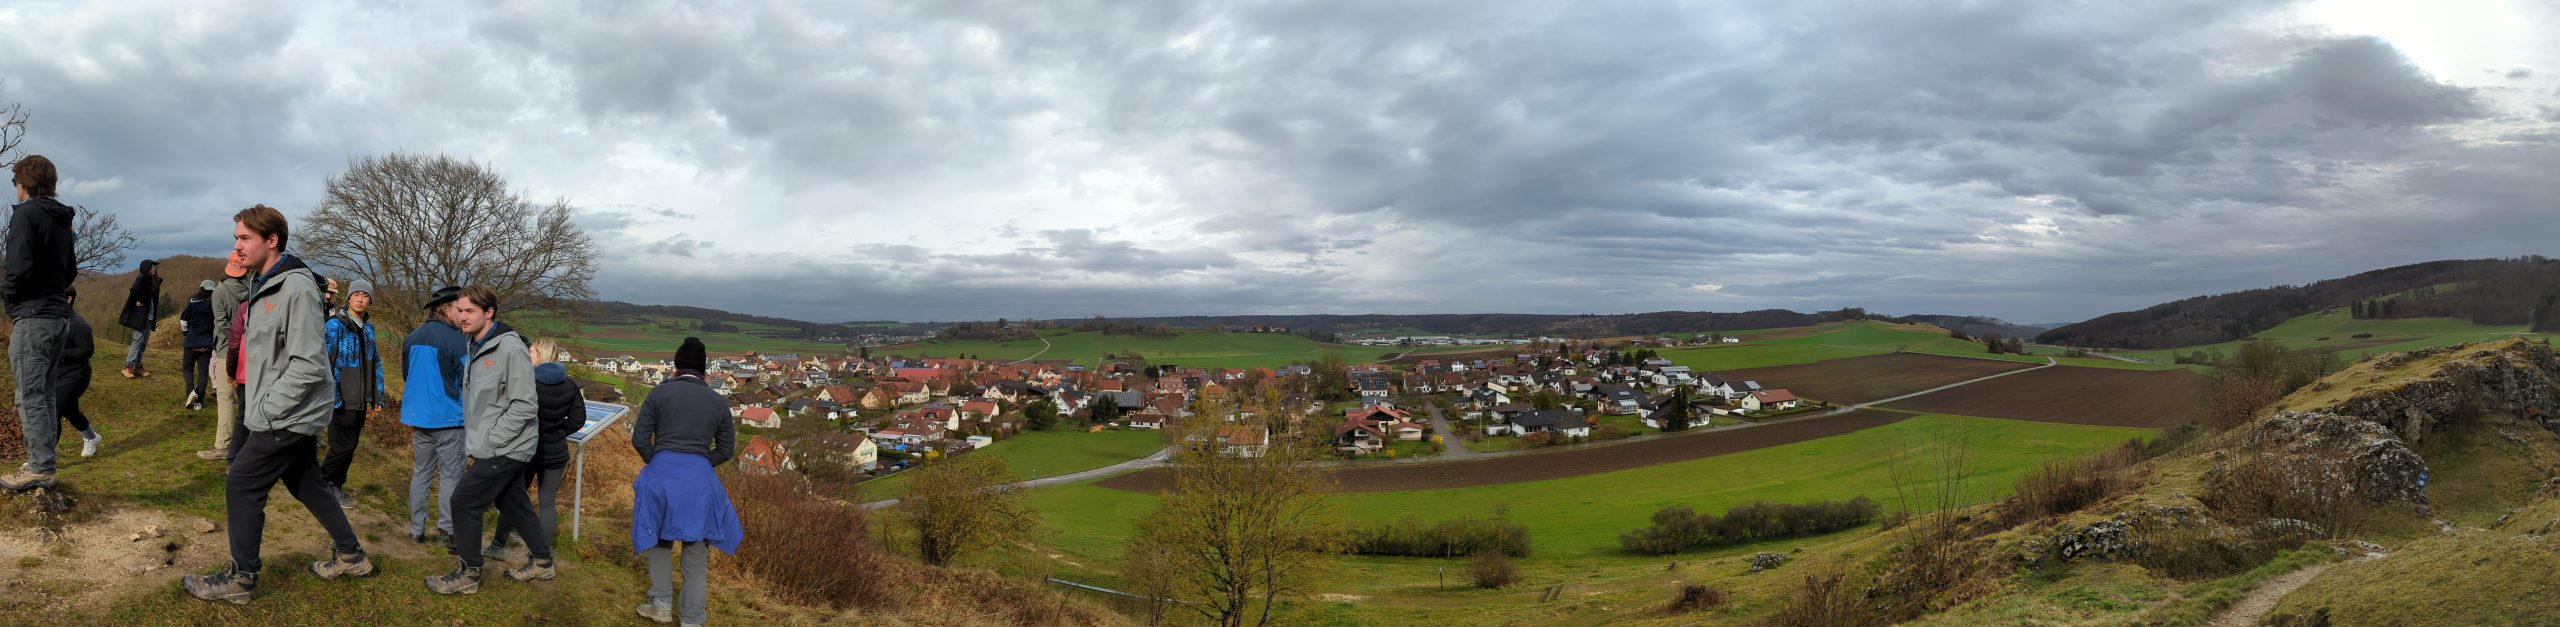 A view from a high point across a small German village and surrounding green farmer's fields. The sky is overcast (grey and cloudy).